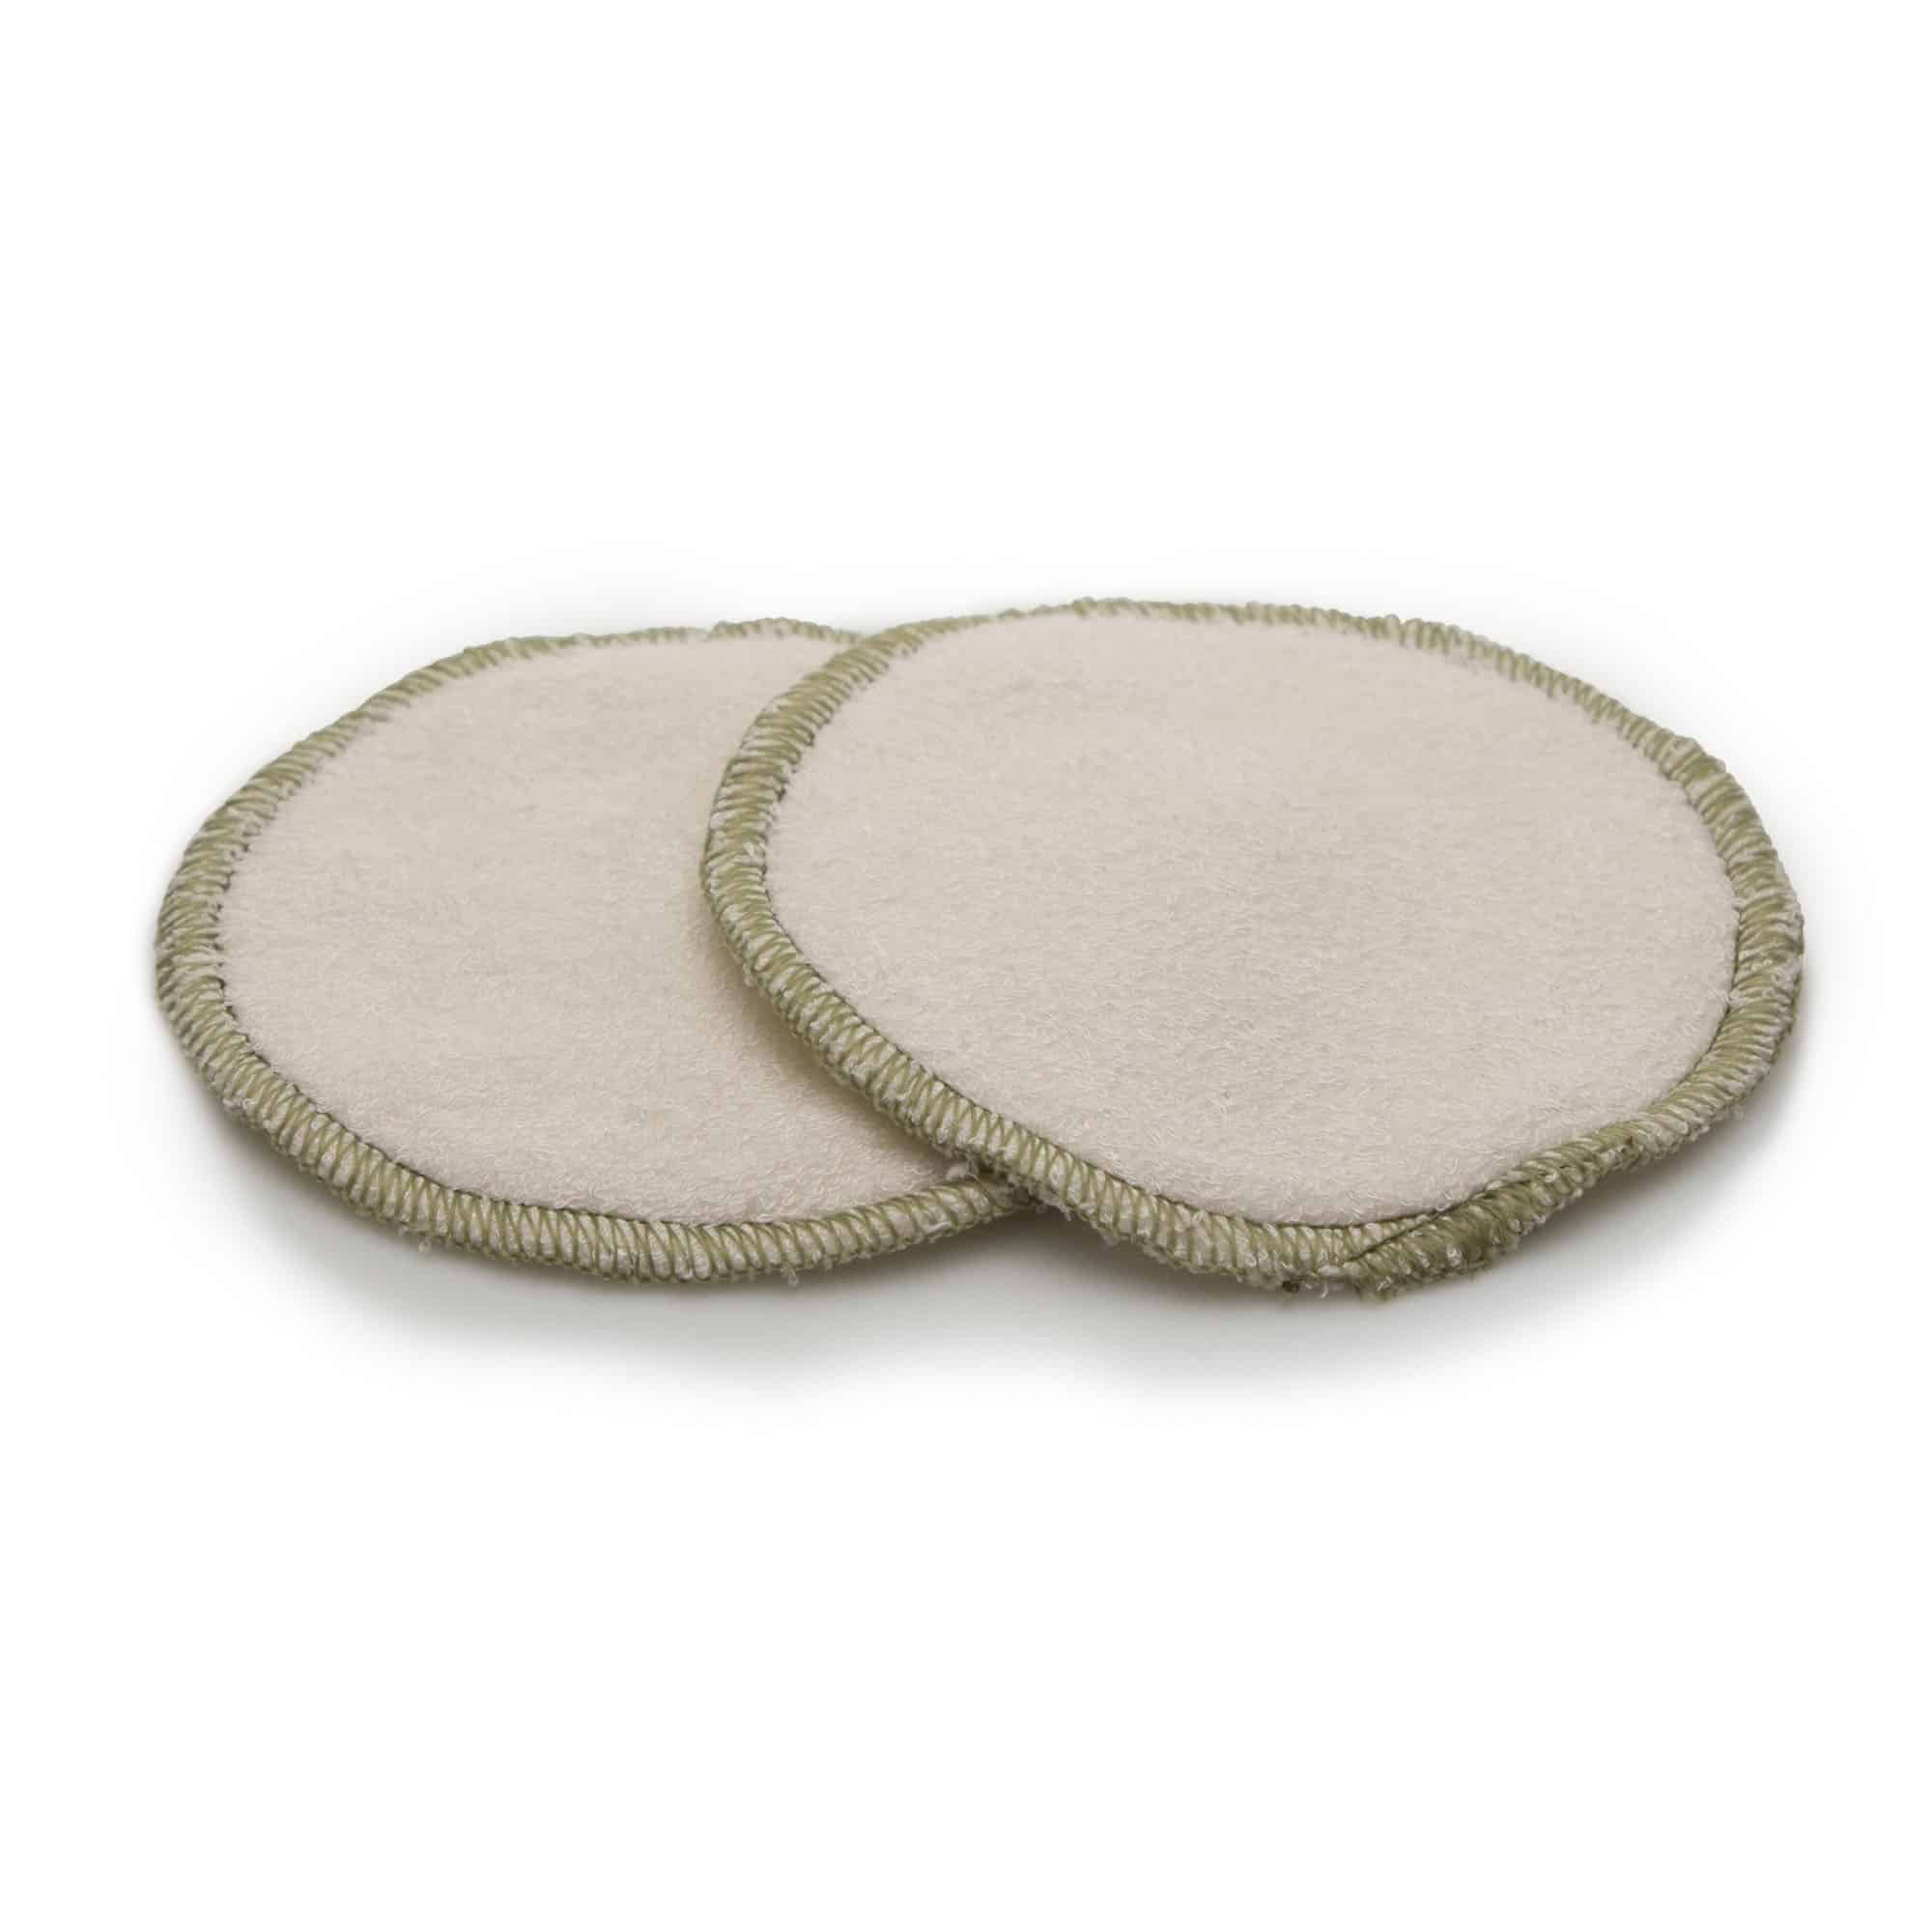 Washable make-up remover pads - Bamboo